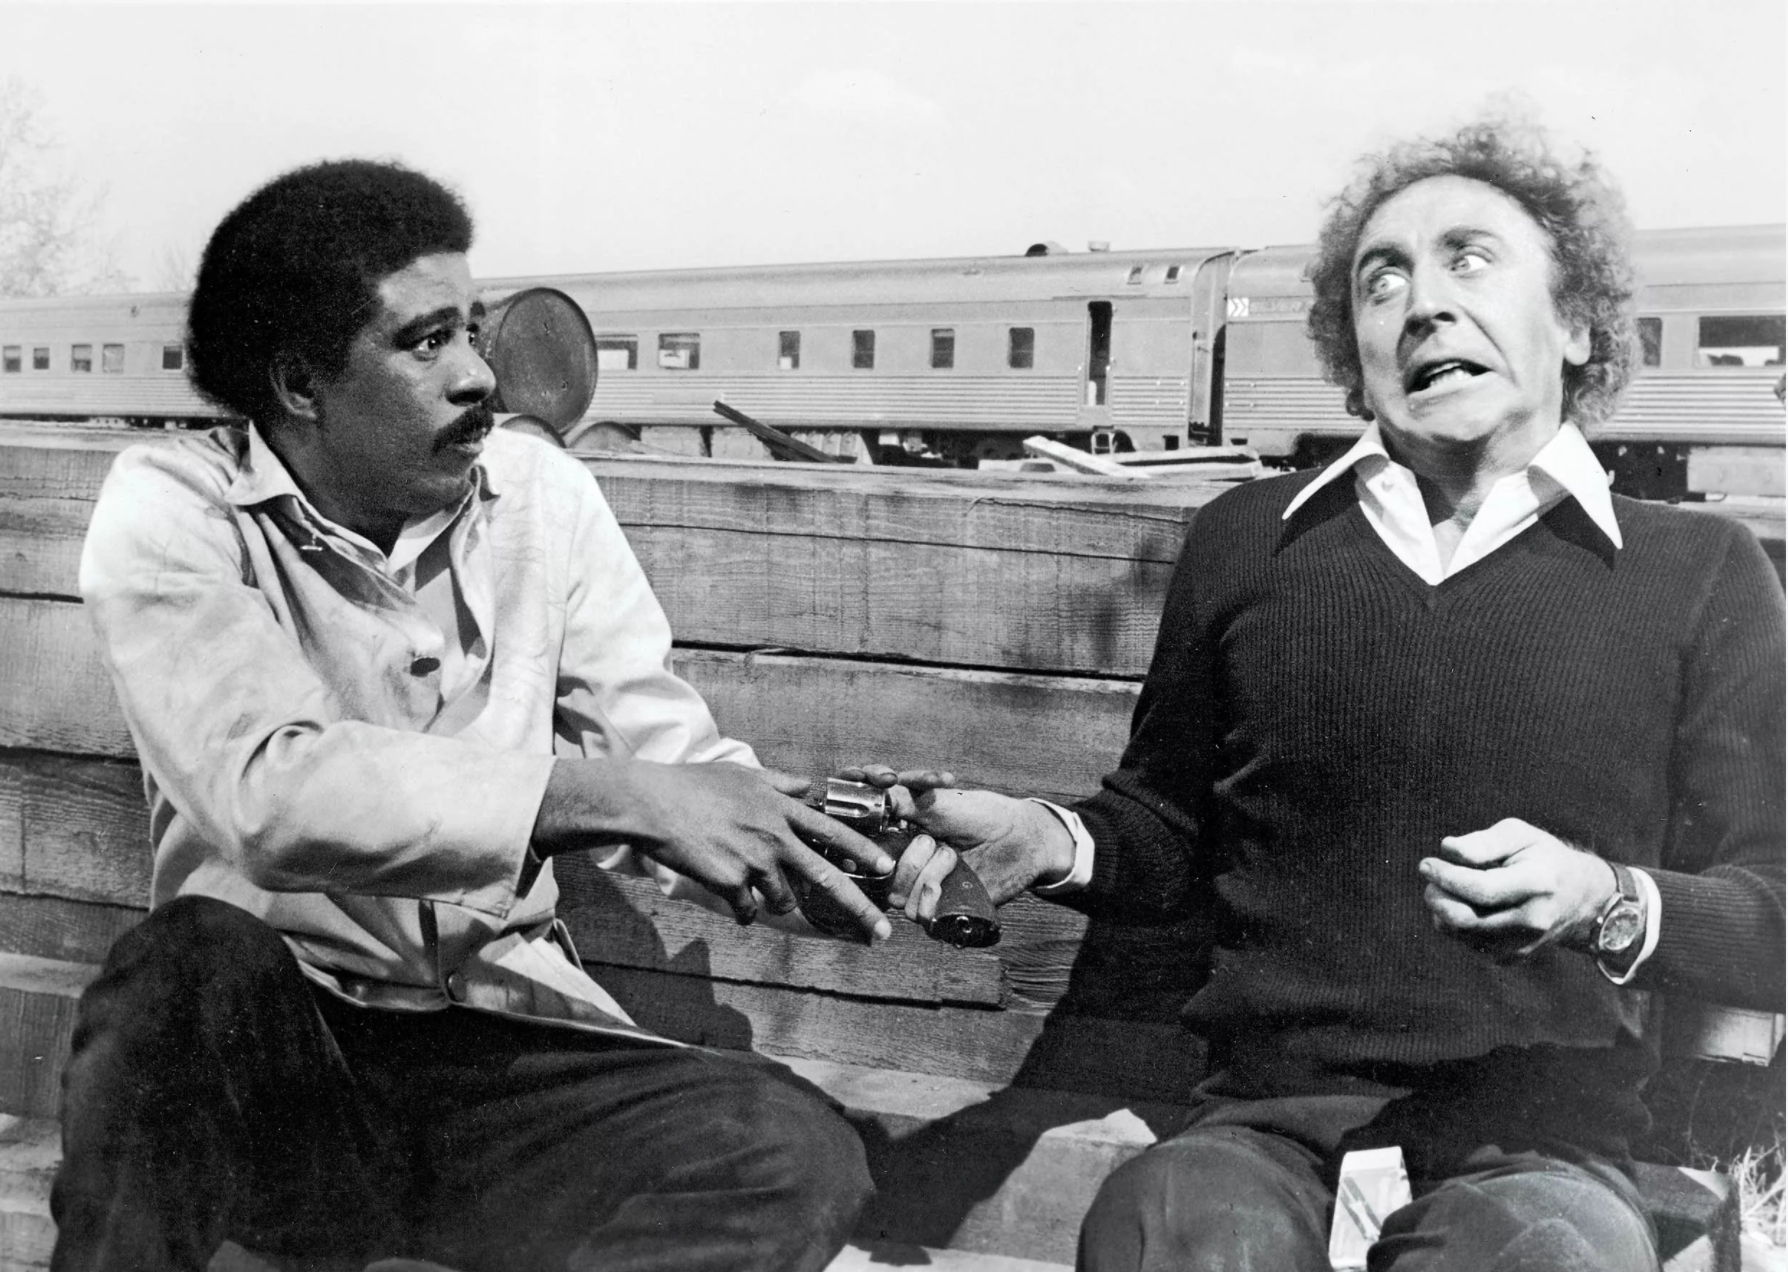 Richard Pryor on the set of a movie with fellow actor holding  a prop gun during a scene.